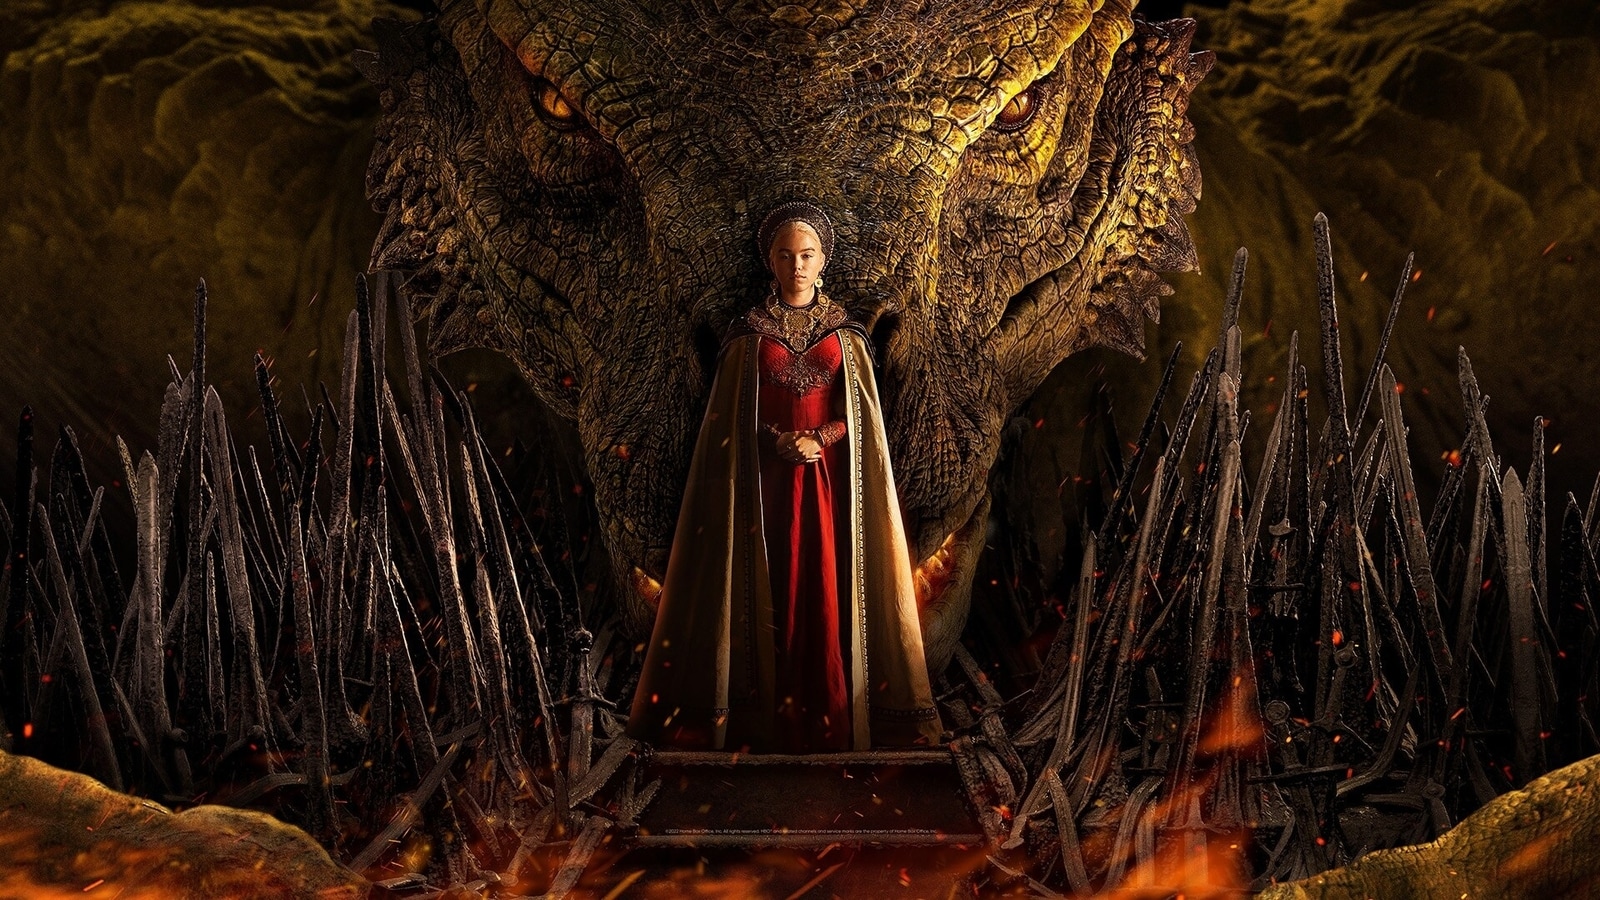 House of the Dragon brings back Game of Thrones’ iconic theme music, fans react | Web Series